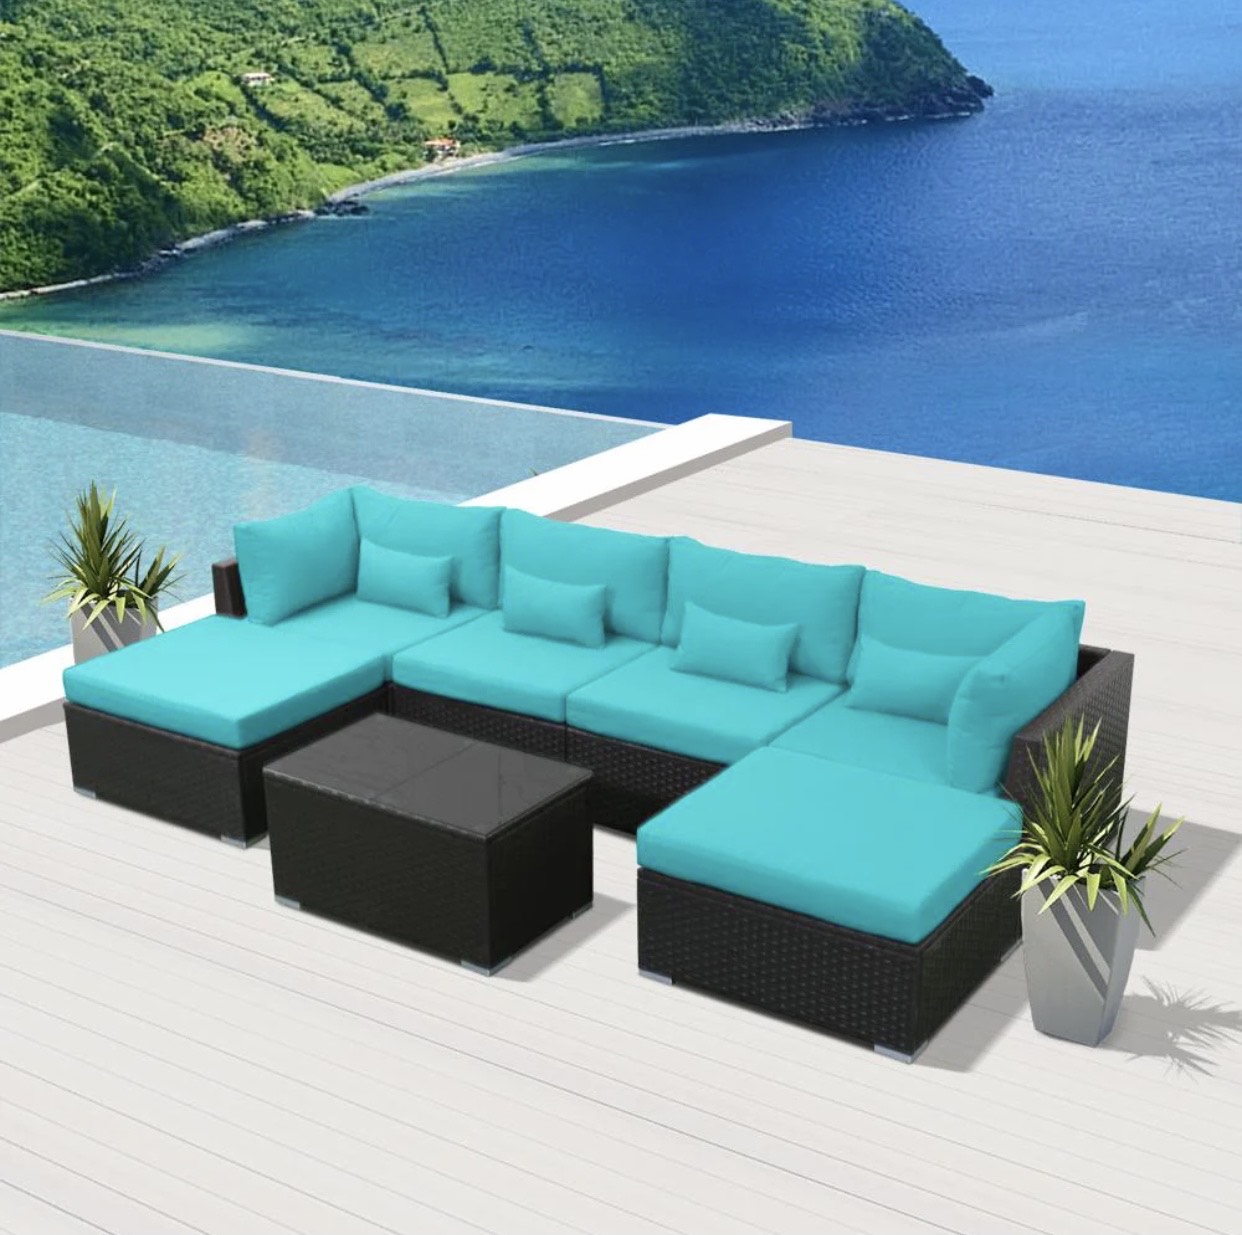 Blue Turquoise 7C Replacement Cushion Covers Outdoor Patio Furniture Set (Without Foam Insis)